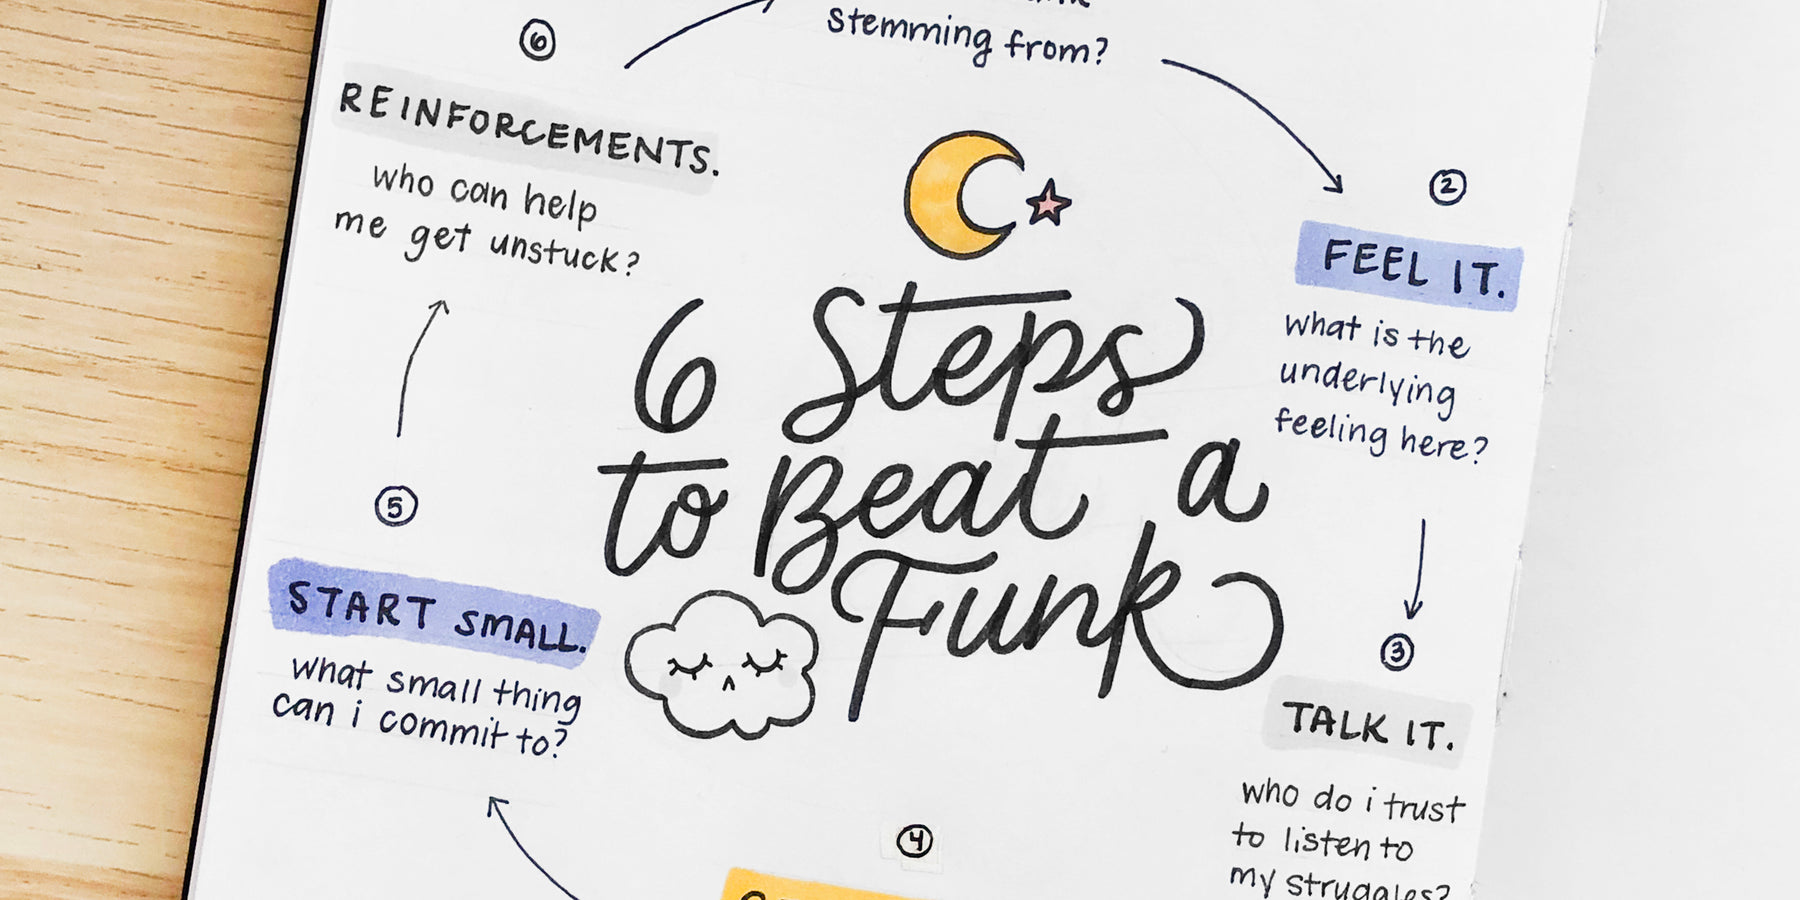 6 Steps to Beat a Funk